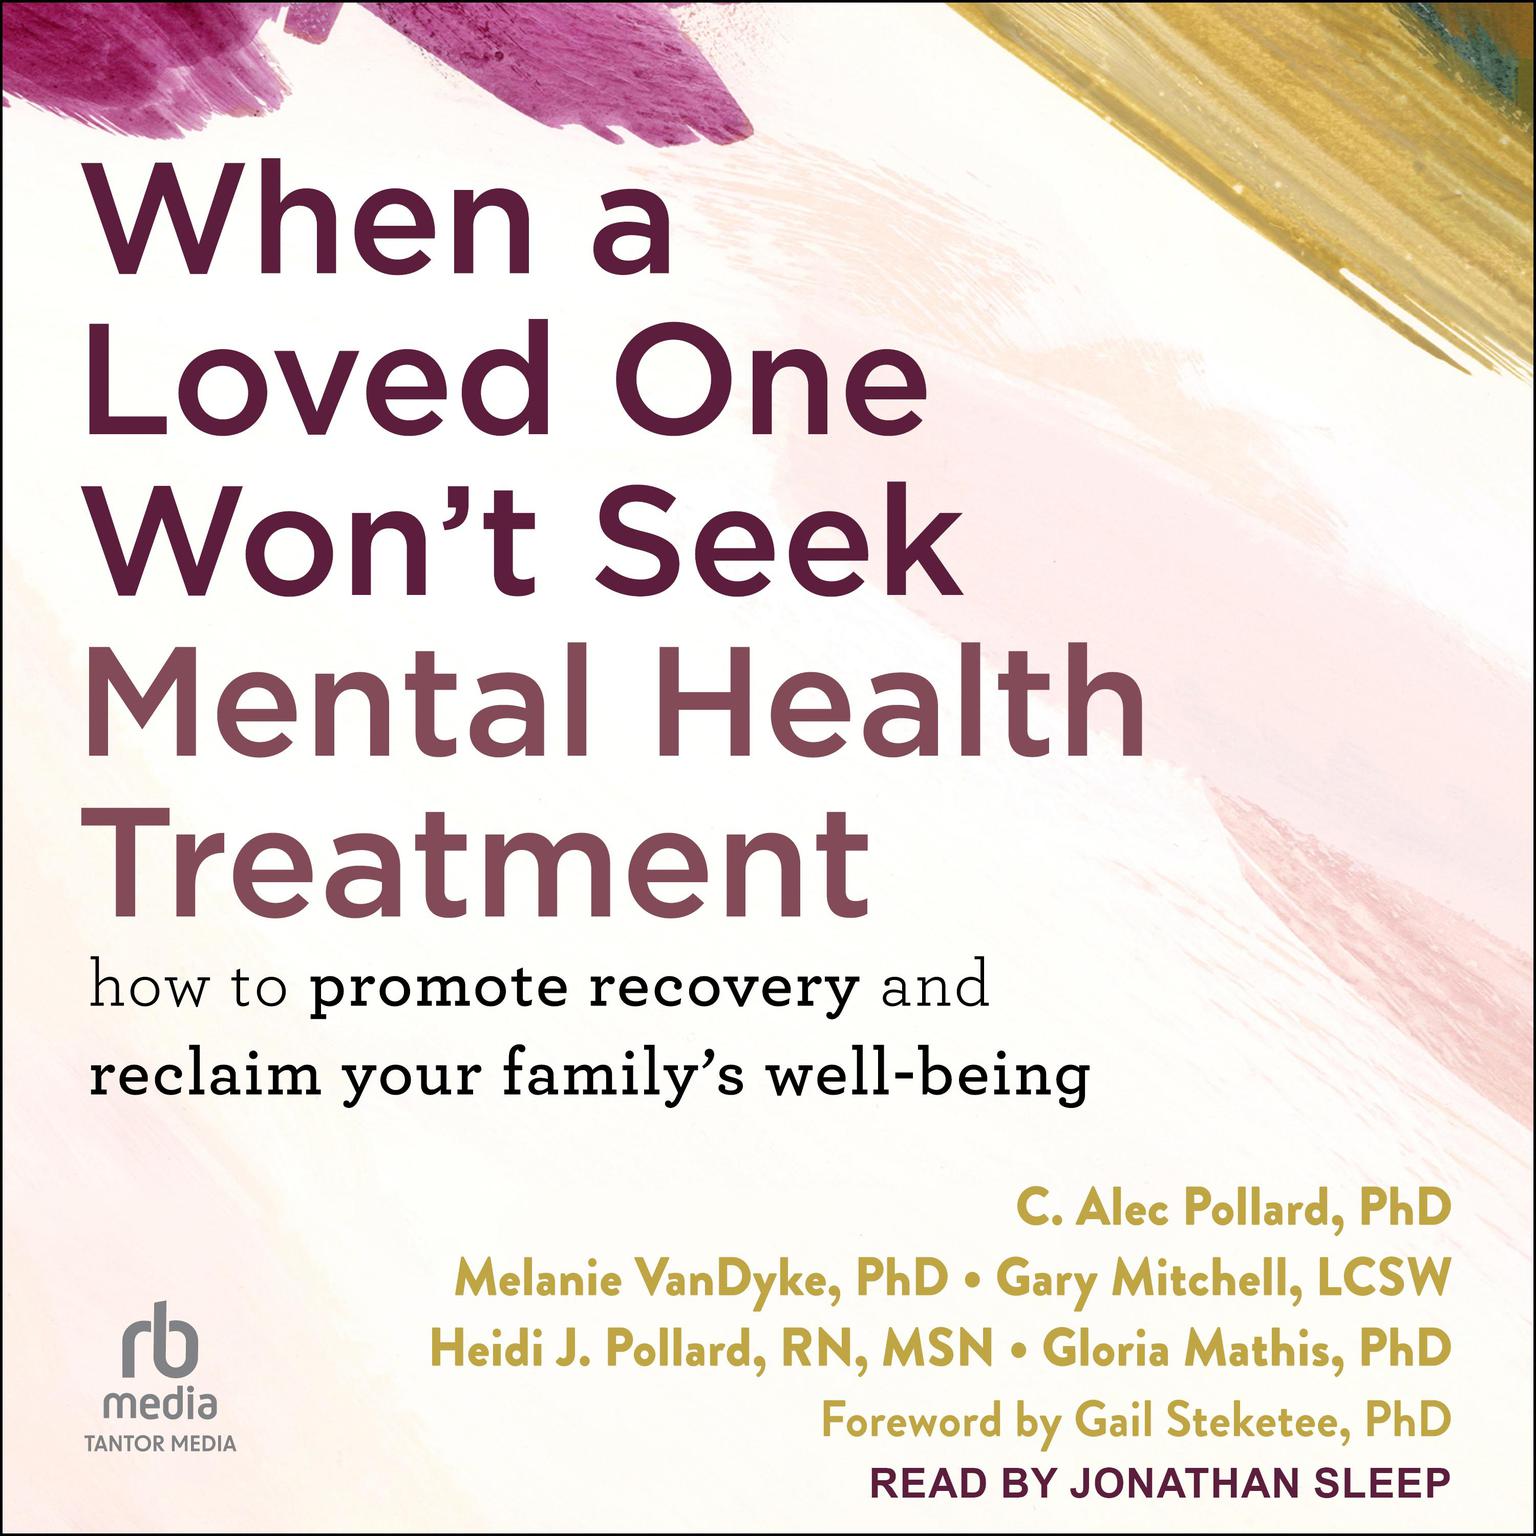 When a Loved One Wont Seek Mental Health Treatment: How to Promote Recovery and Reclaim Your Familys Well-Being Audiobook, by C. Alec Pollard